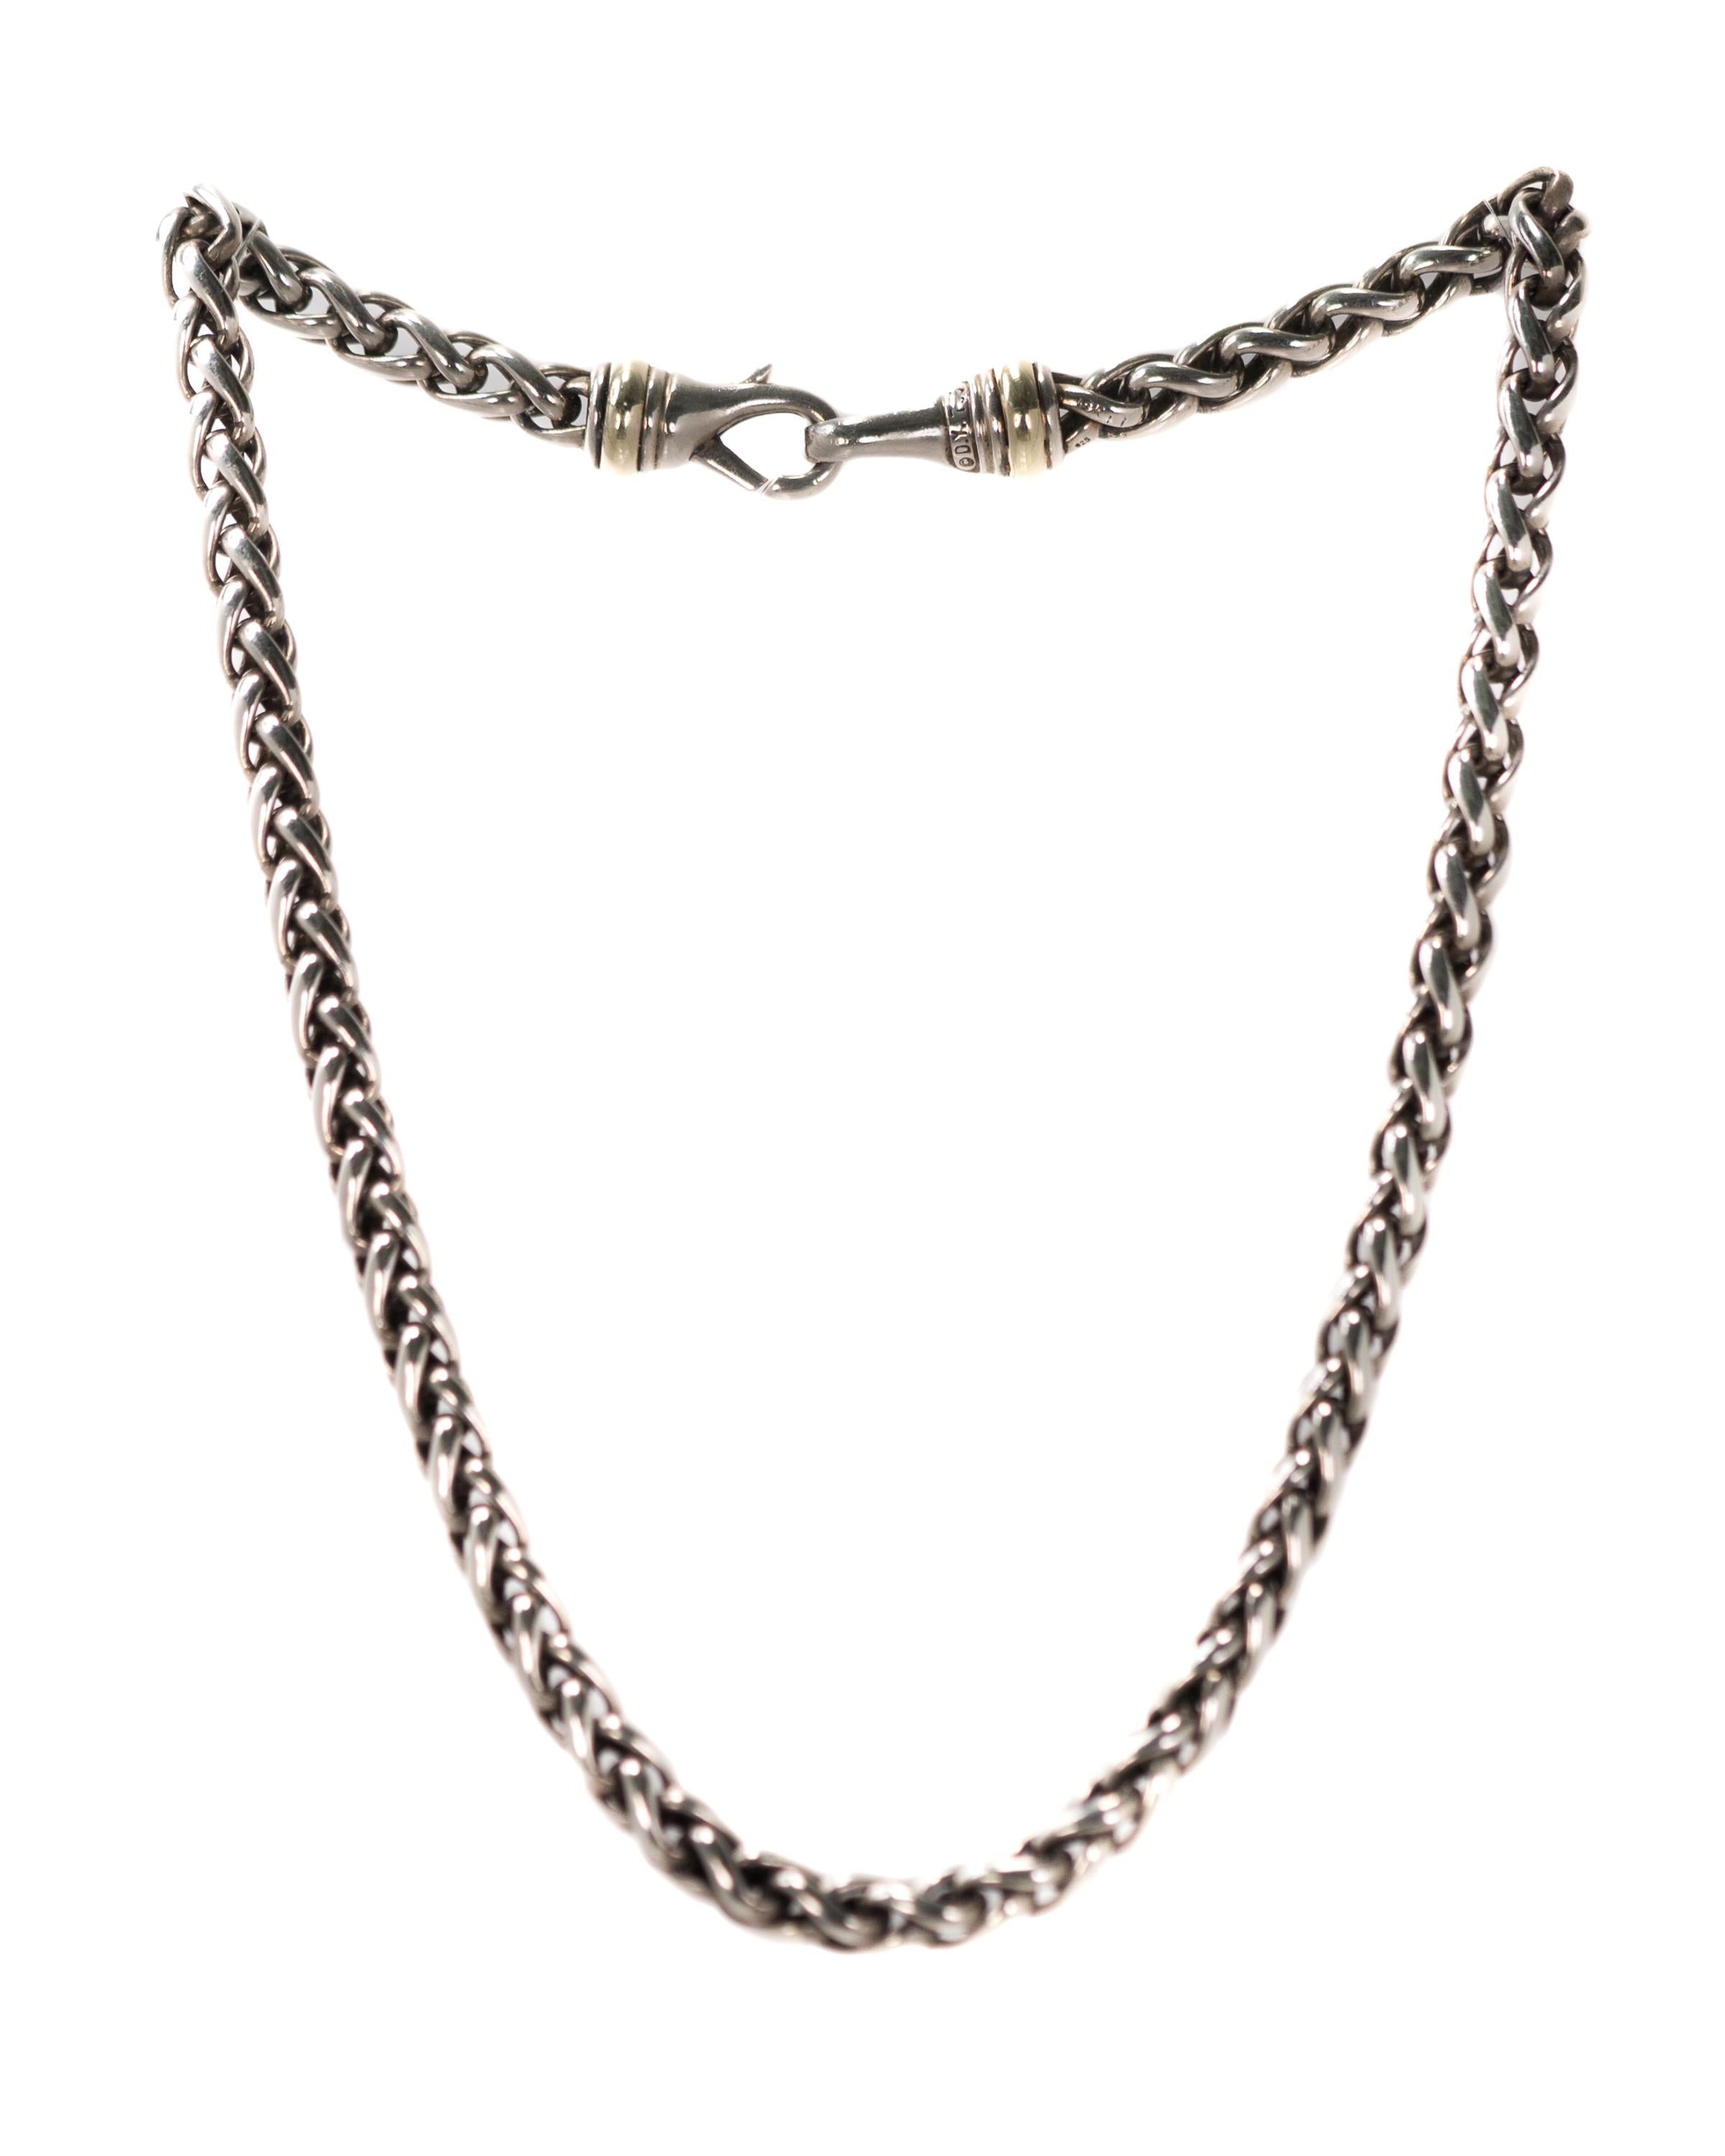 David Yurman Choker Necklace Wheat Chain - Sterling Silver, 14 Karat Yellow Gold

Features:
16 inch long choker length
Wheat chain link pattern
6 millimeters wide chain
Sterling Silver chain and clasp
14 Karat Yellow Gold band detail on each end of